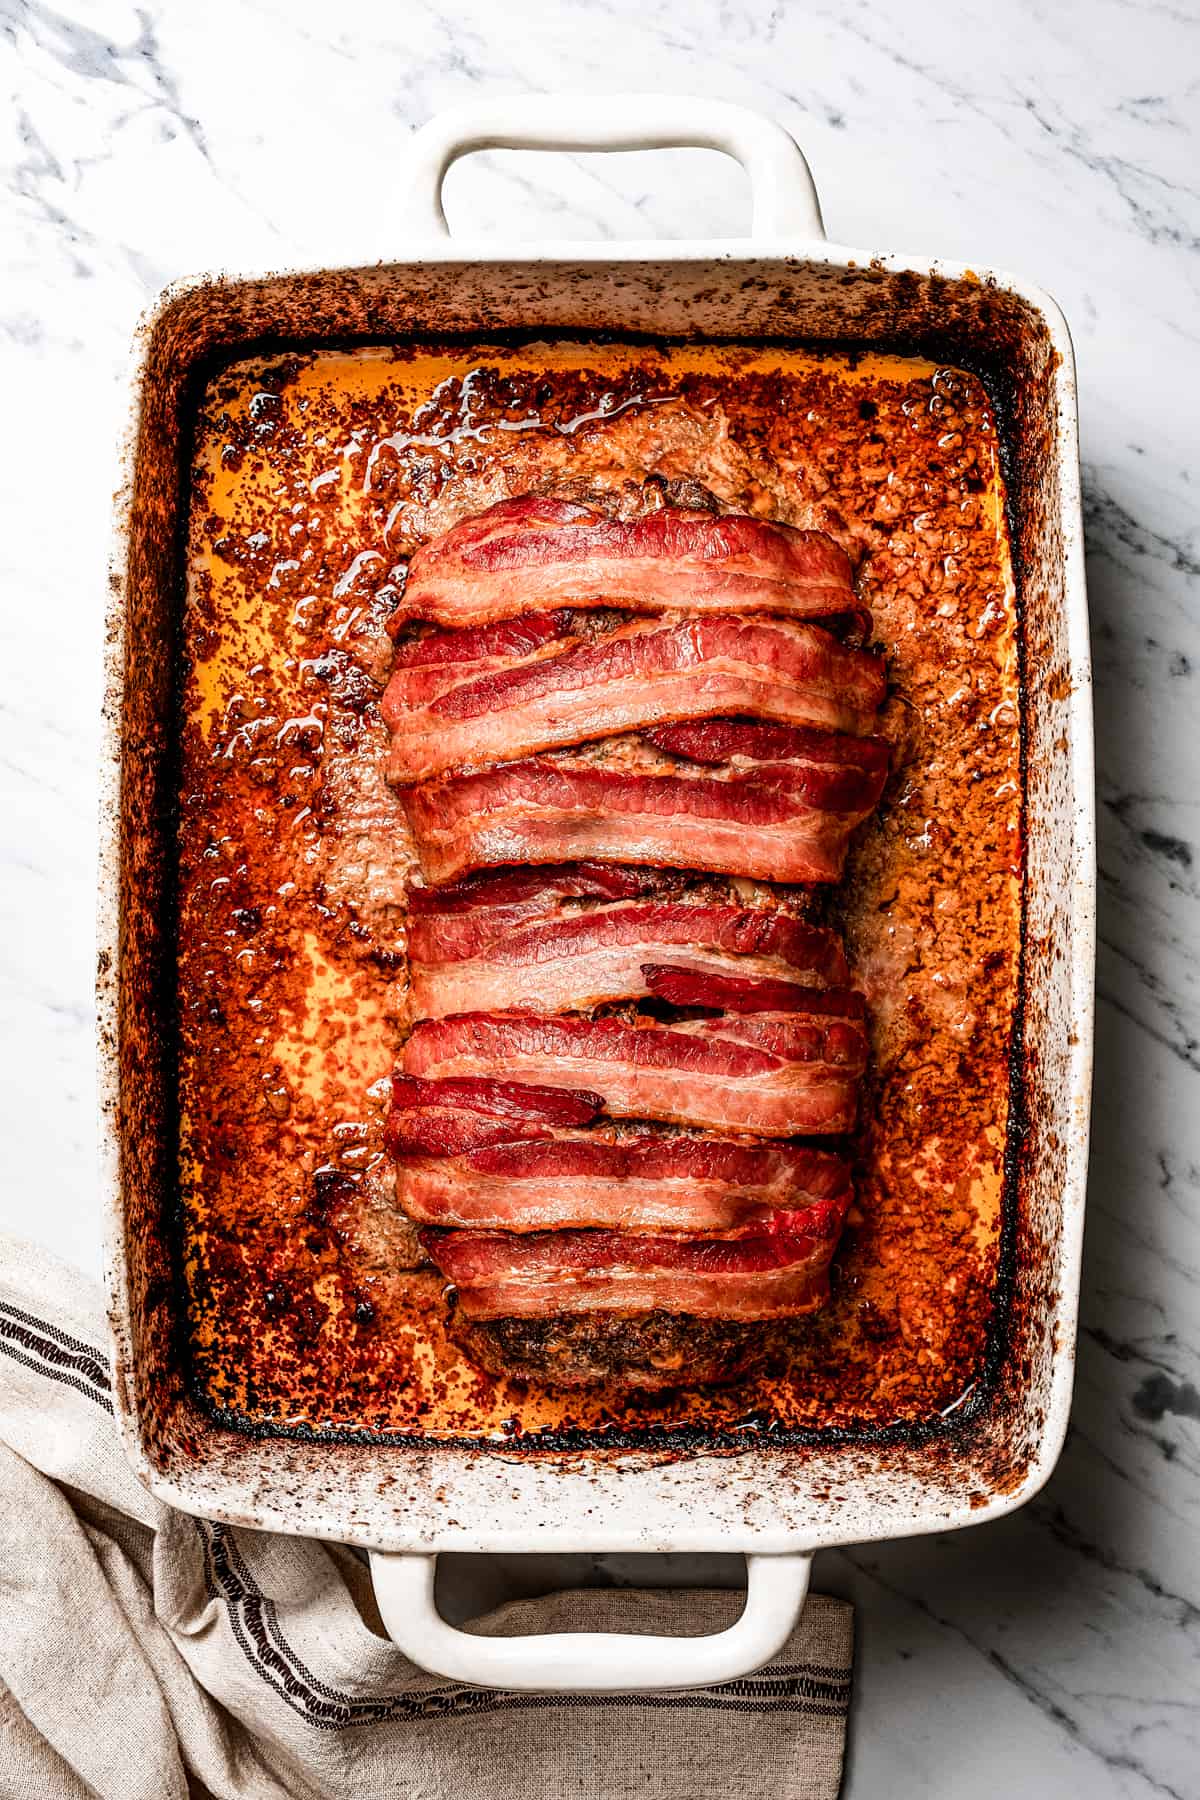 A baked meatloaf in a baking dish.